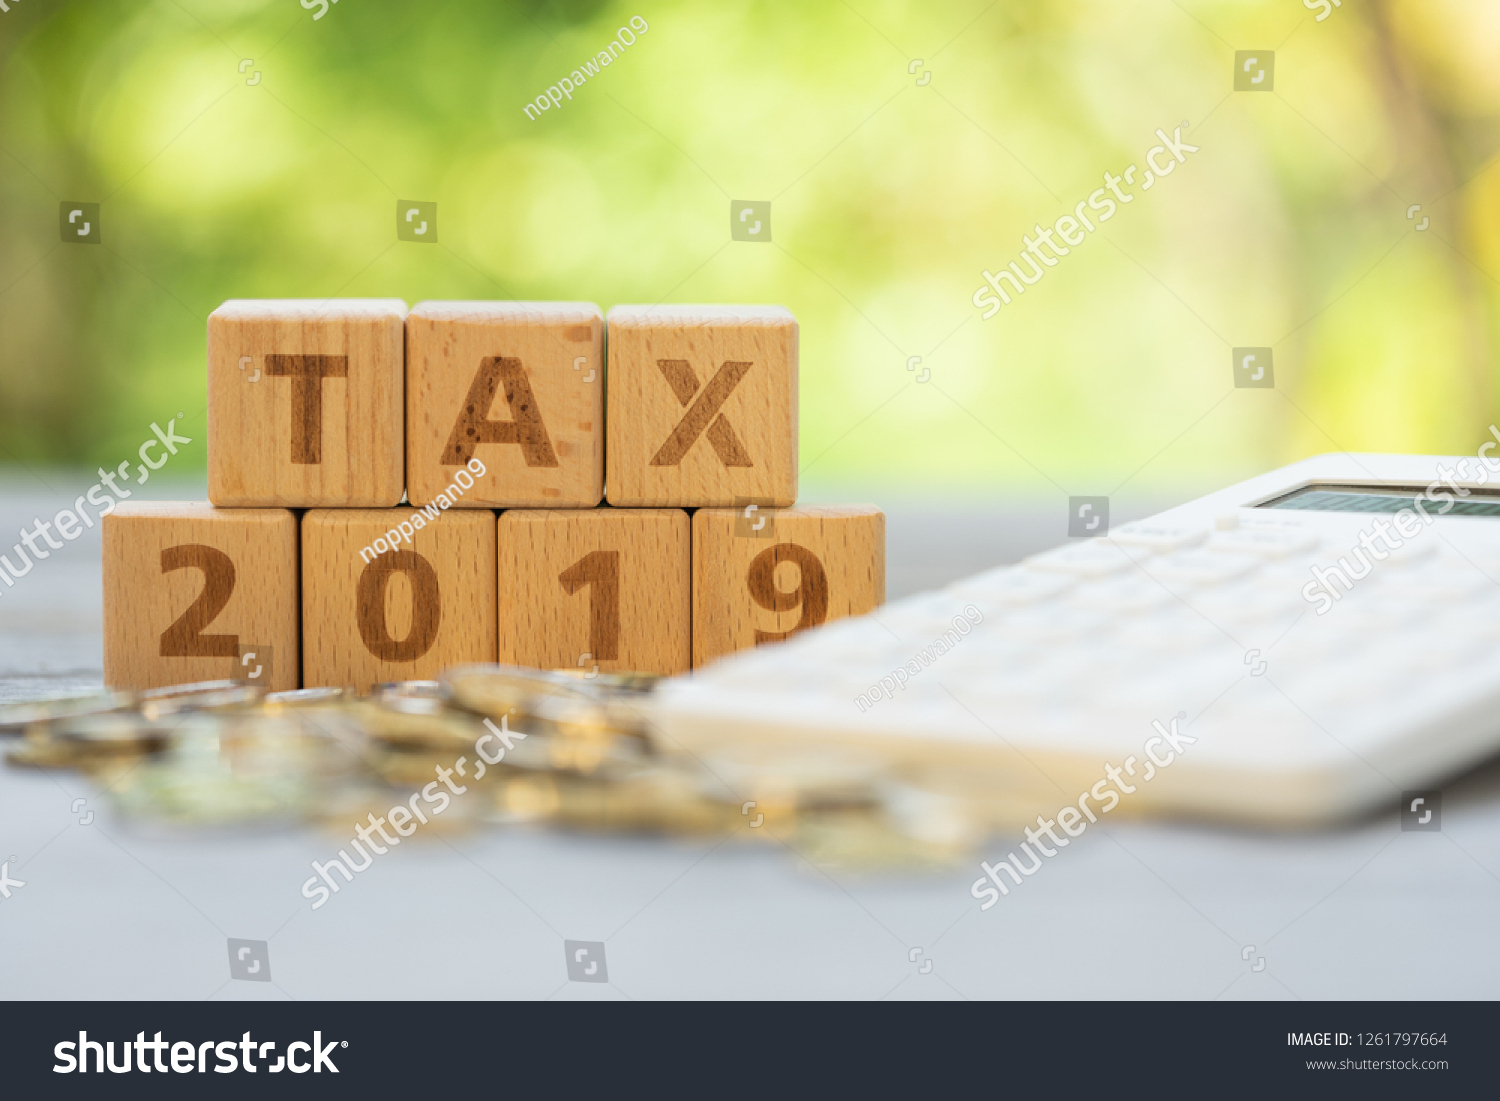 Word block "TAX", and "2019" on pile of coins with calculator as background. Income, expenses, tax, financial data. #1261797664